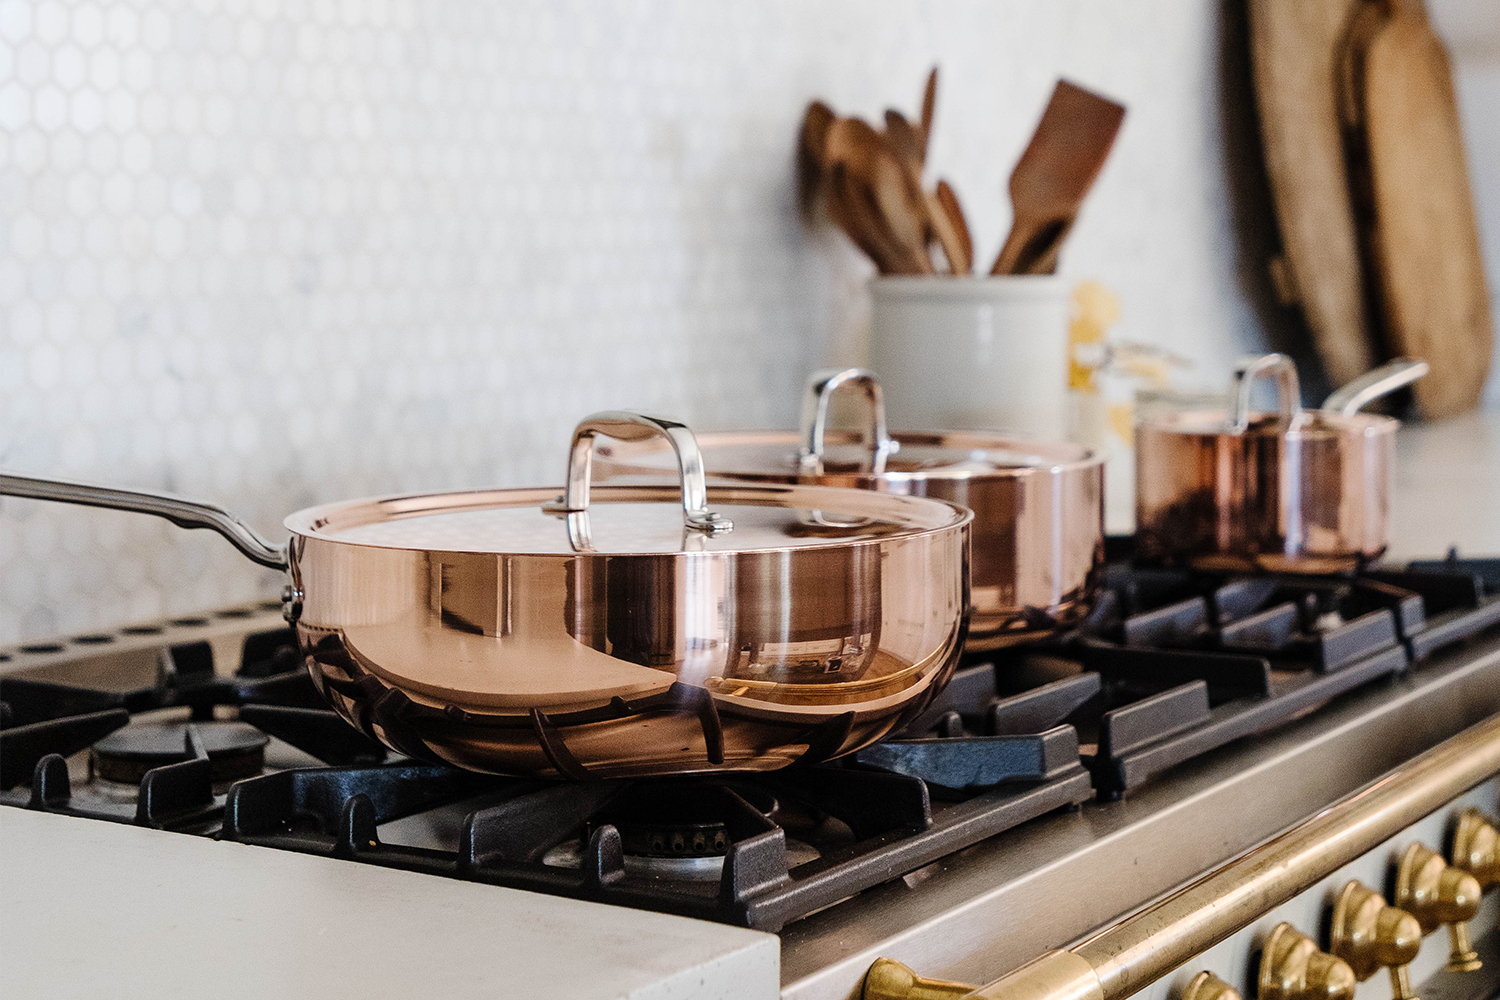 How to Start a Copper Cookware Collection? With Made In. - InsideHook